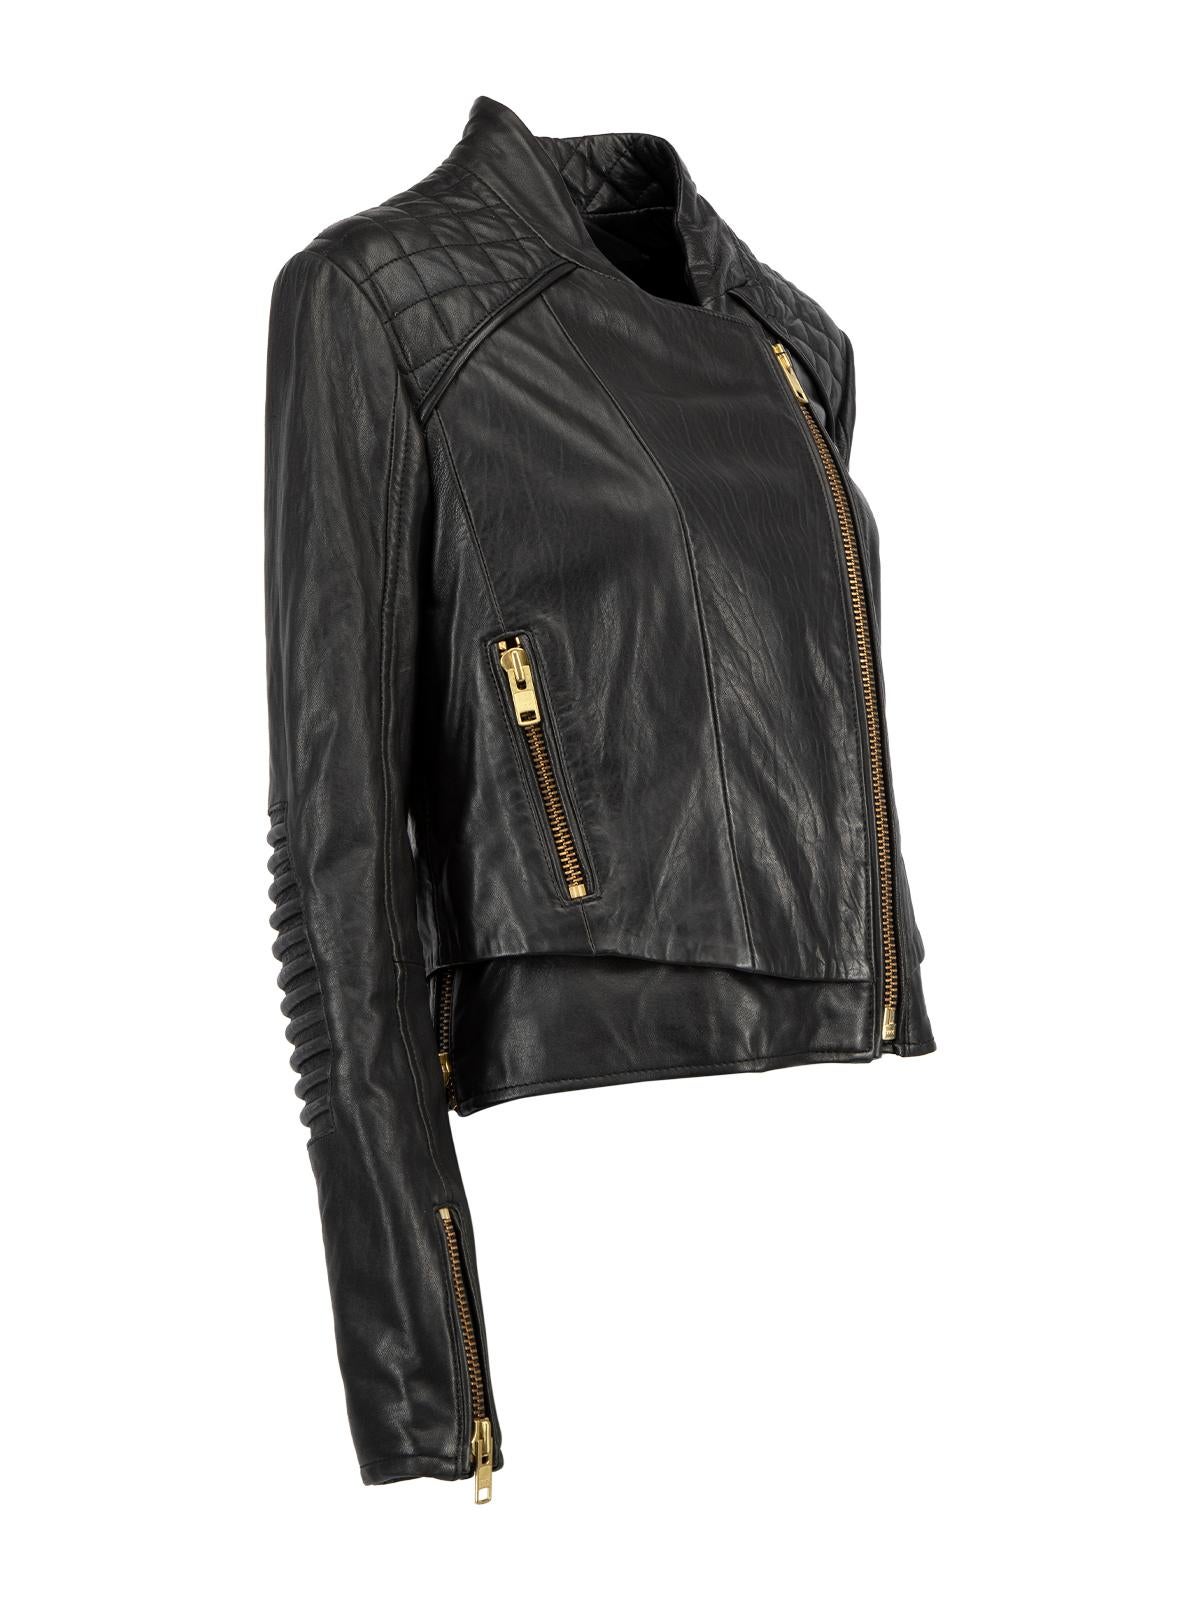 CONDITION is Very good. Minimal wear to jacket is evident. There is natural creasing to the jacket from use on this used The Kooples designer resale item. Details Black Leather Biker jacket Short length Long sleeves Zips on cuff Rows of padded